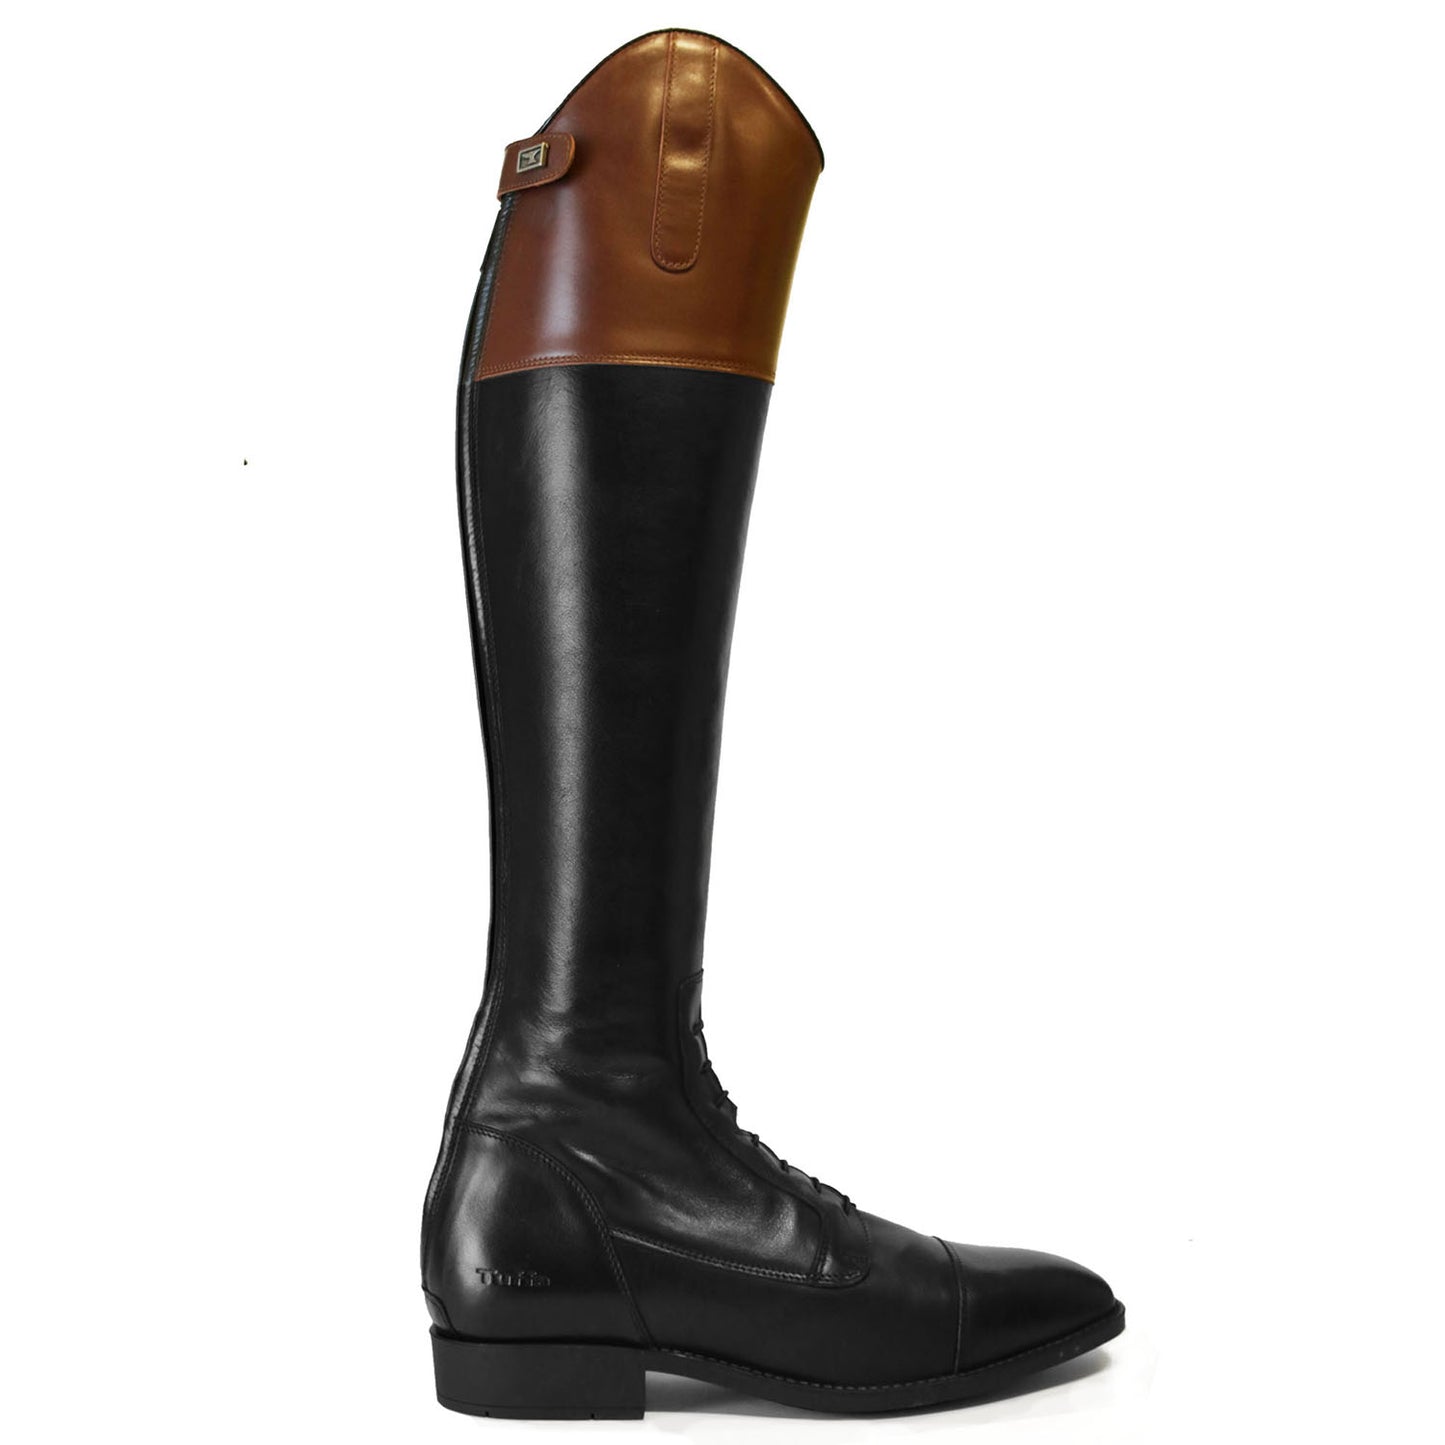 Bespoke Riding Boots, The Stockdale